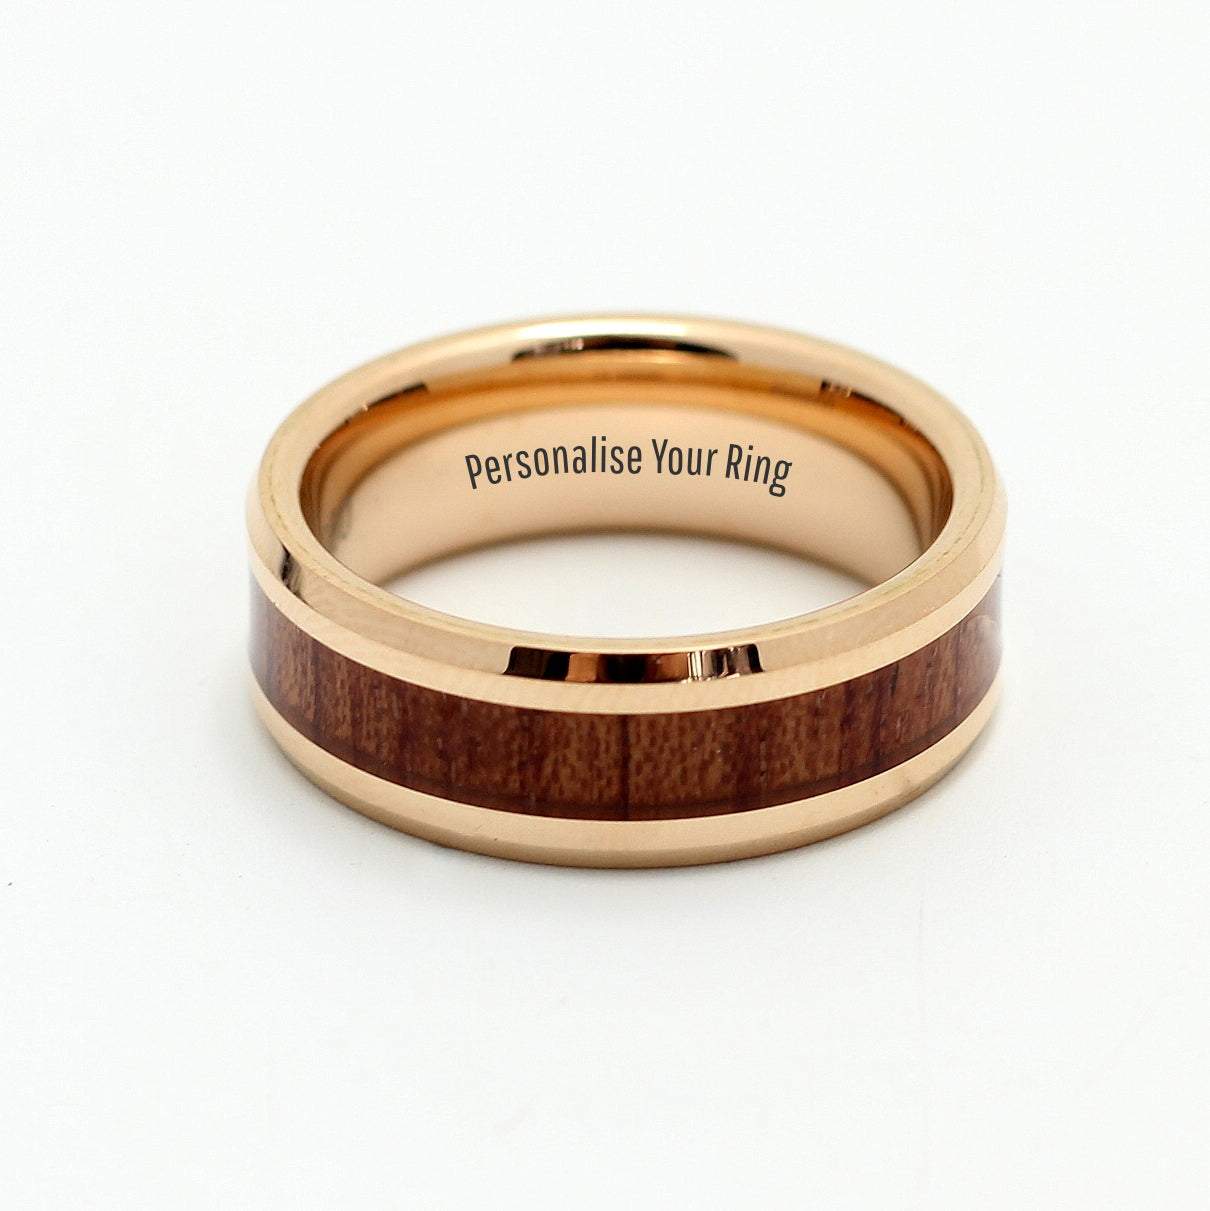 Men's Rose Gold Tungsten Ring with Koa Wood Inlay - Hashtag Bamboo. Personalise your ring, fast delivery.